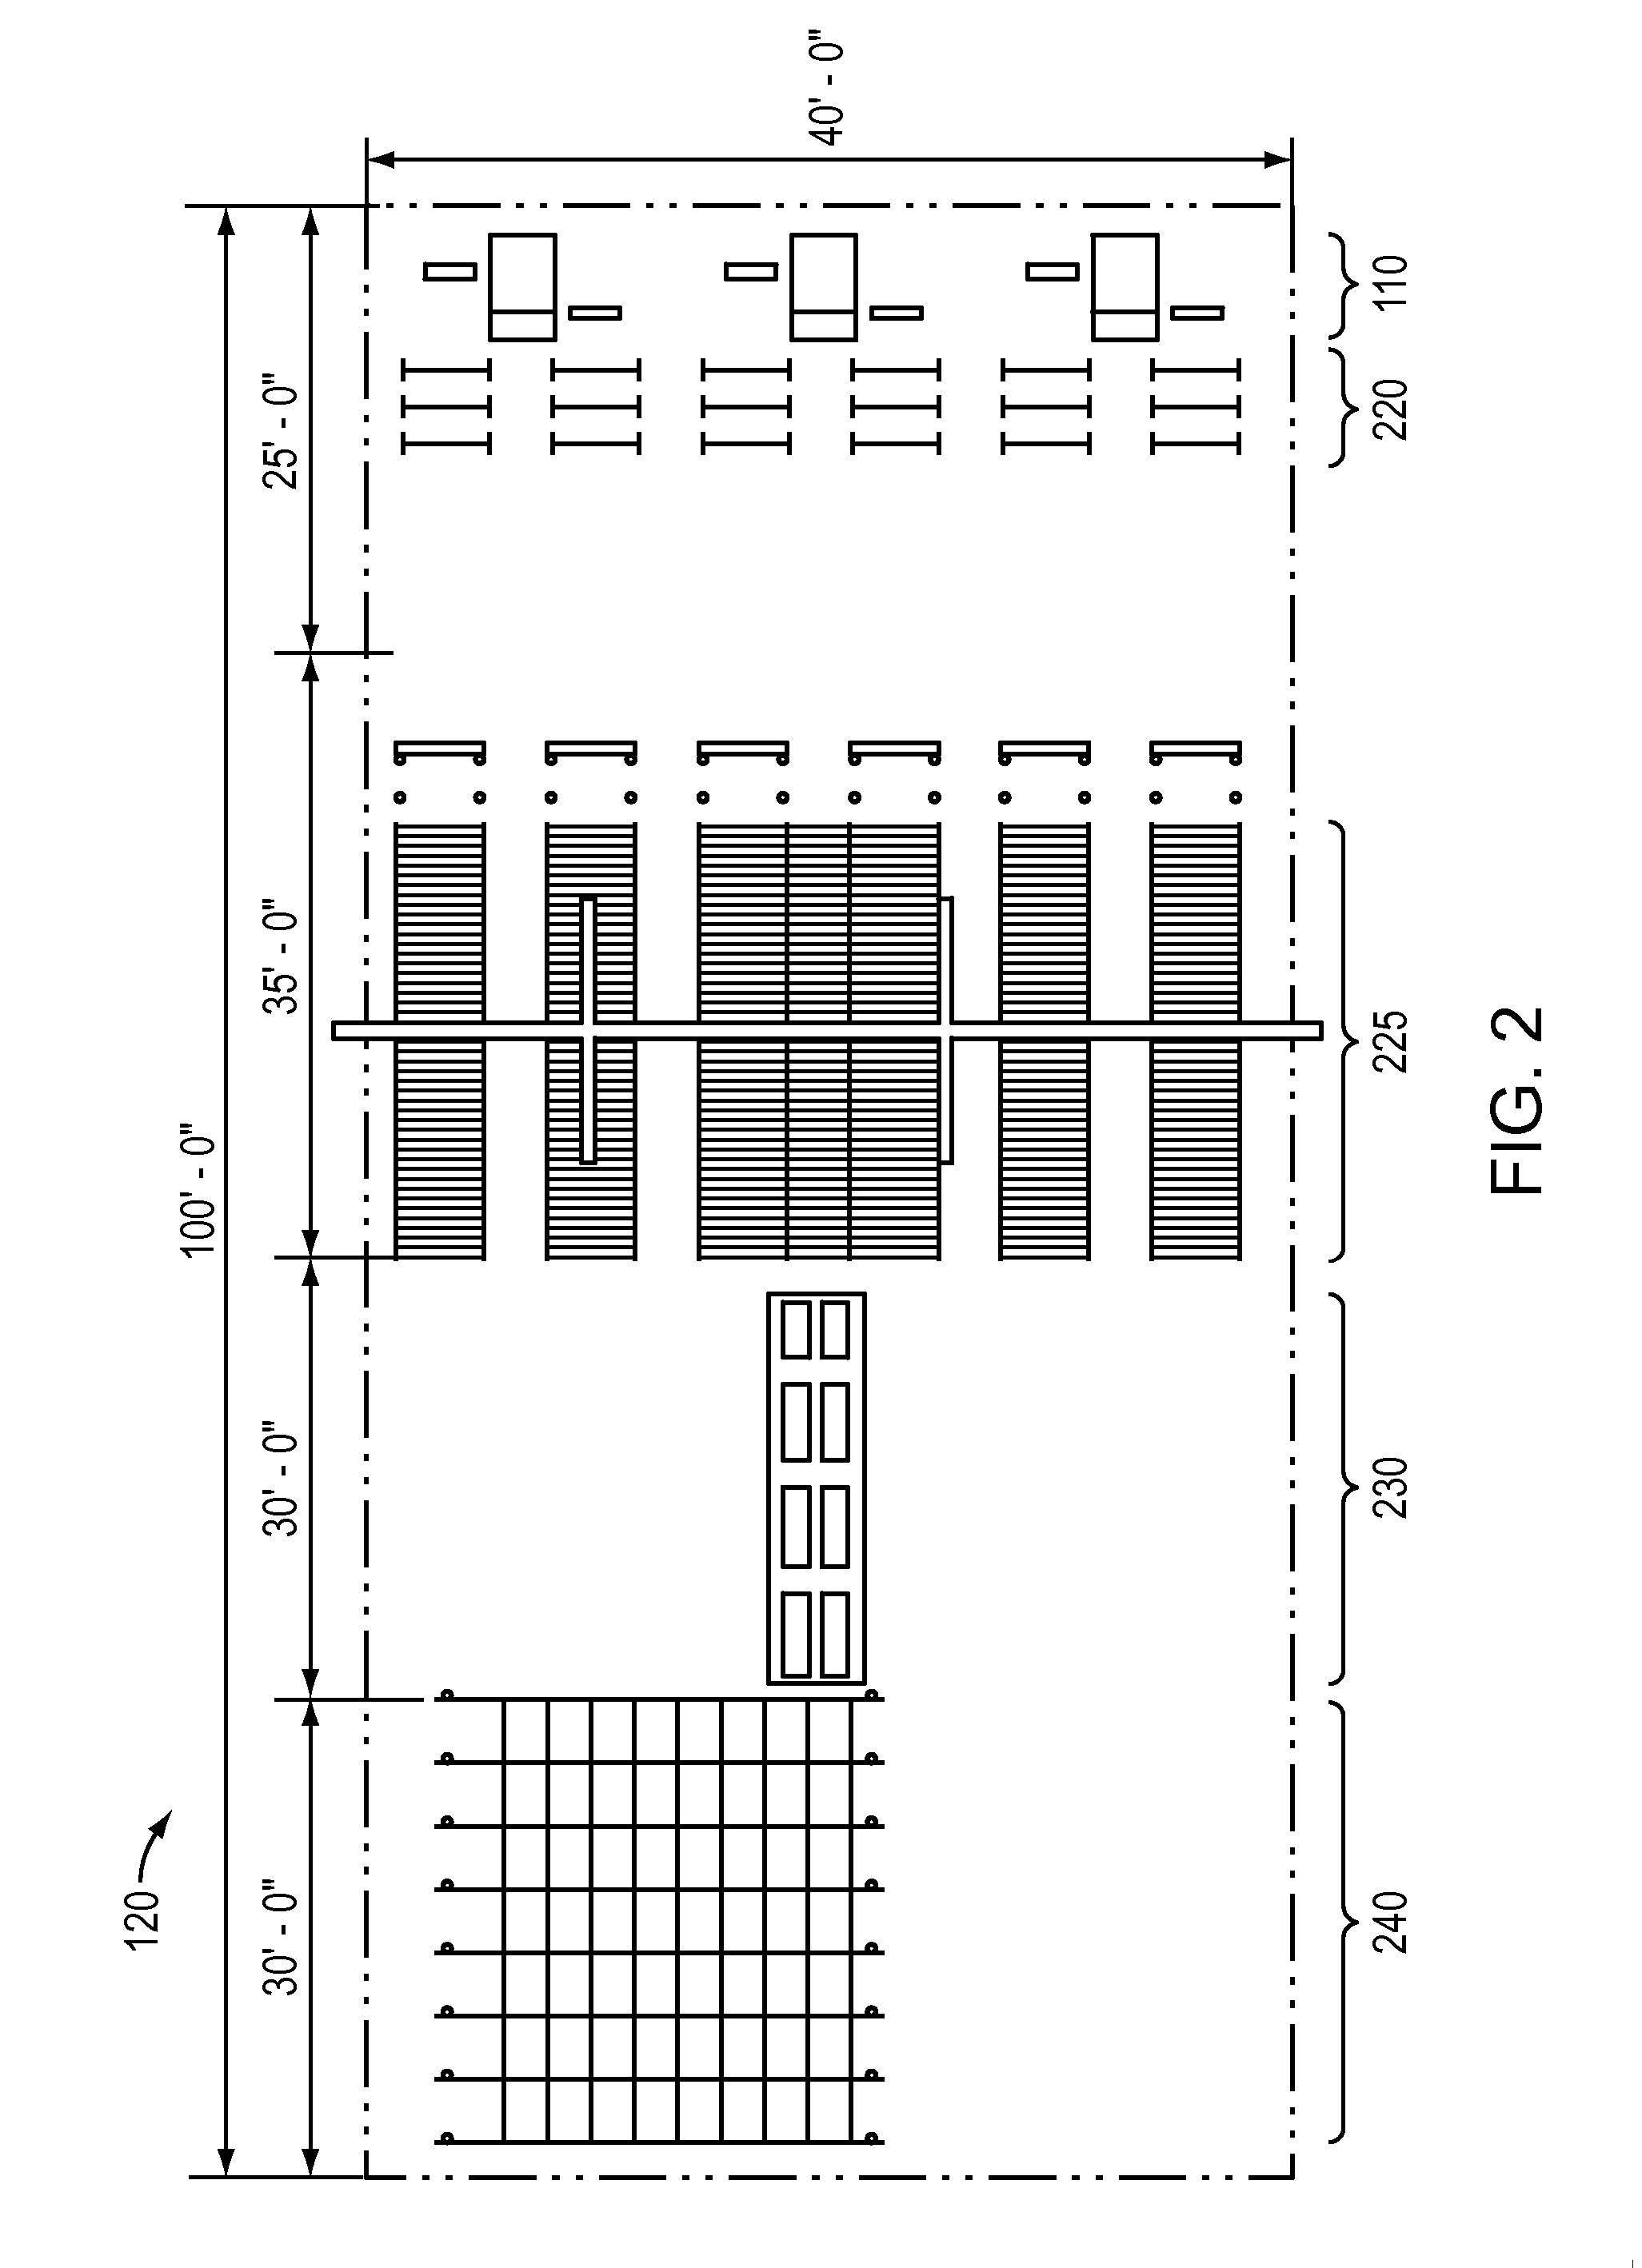 Tools and methods for designing a structure using prefabricated panels